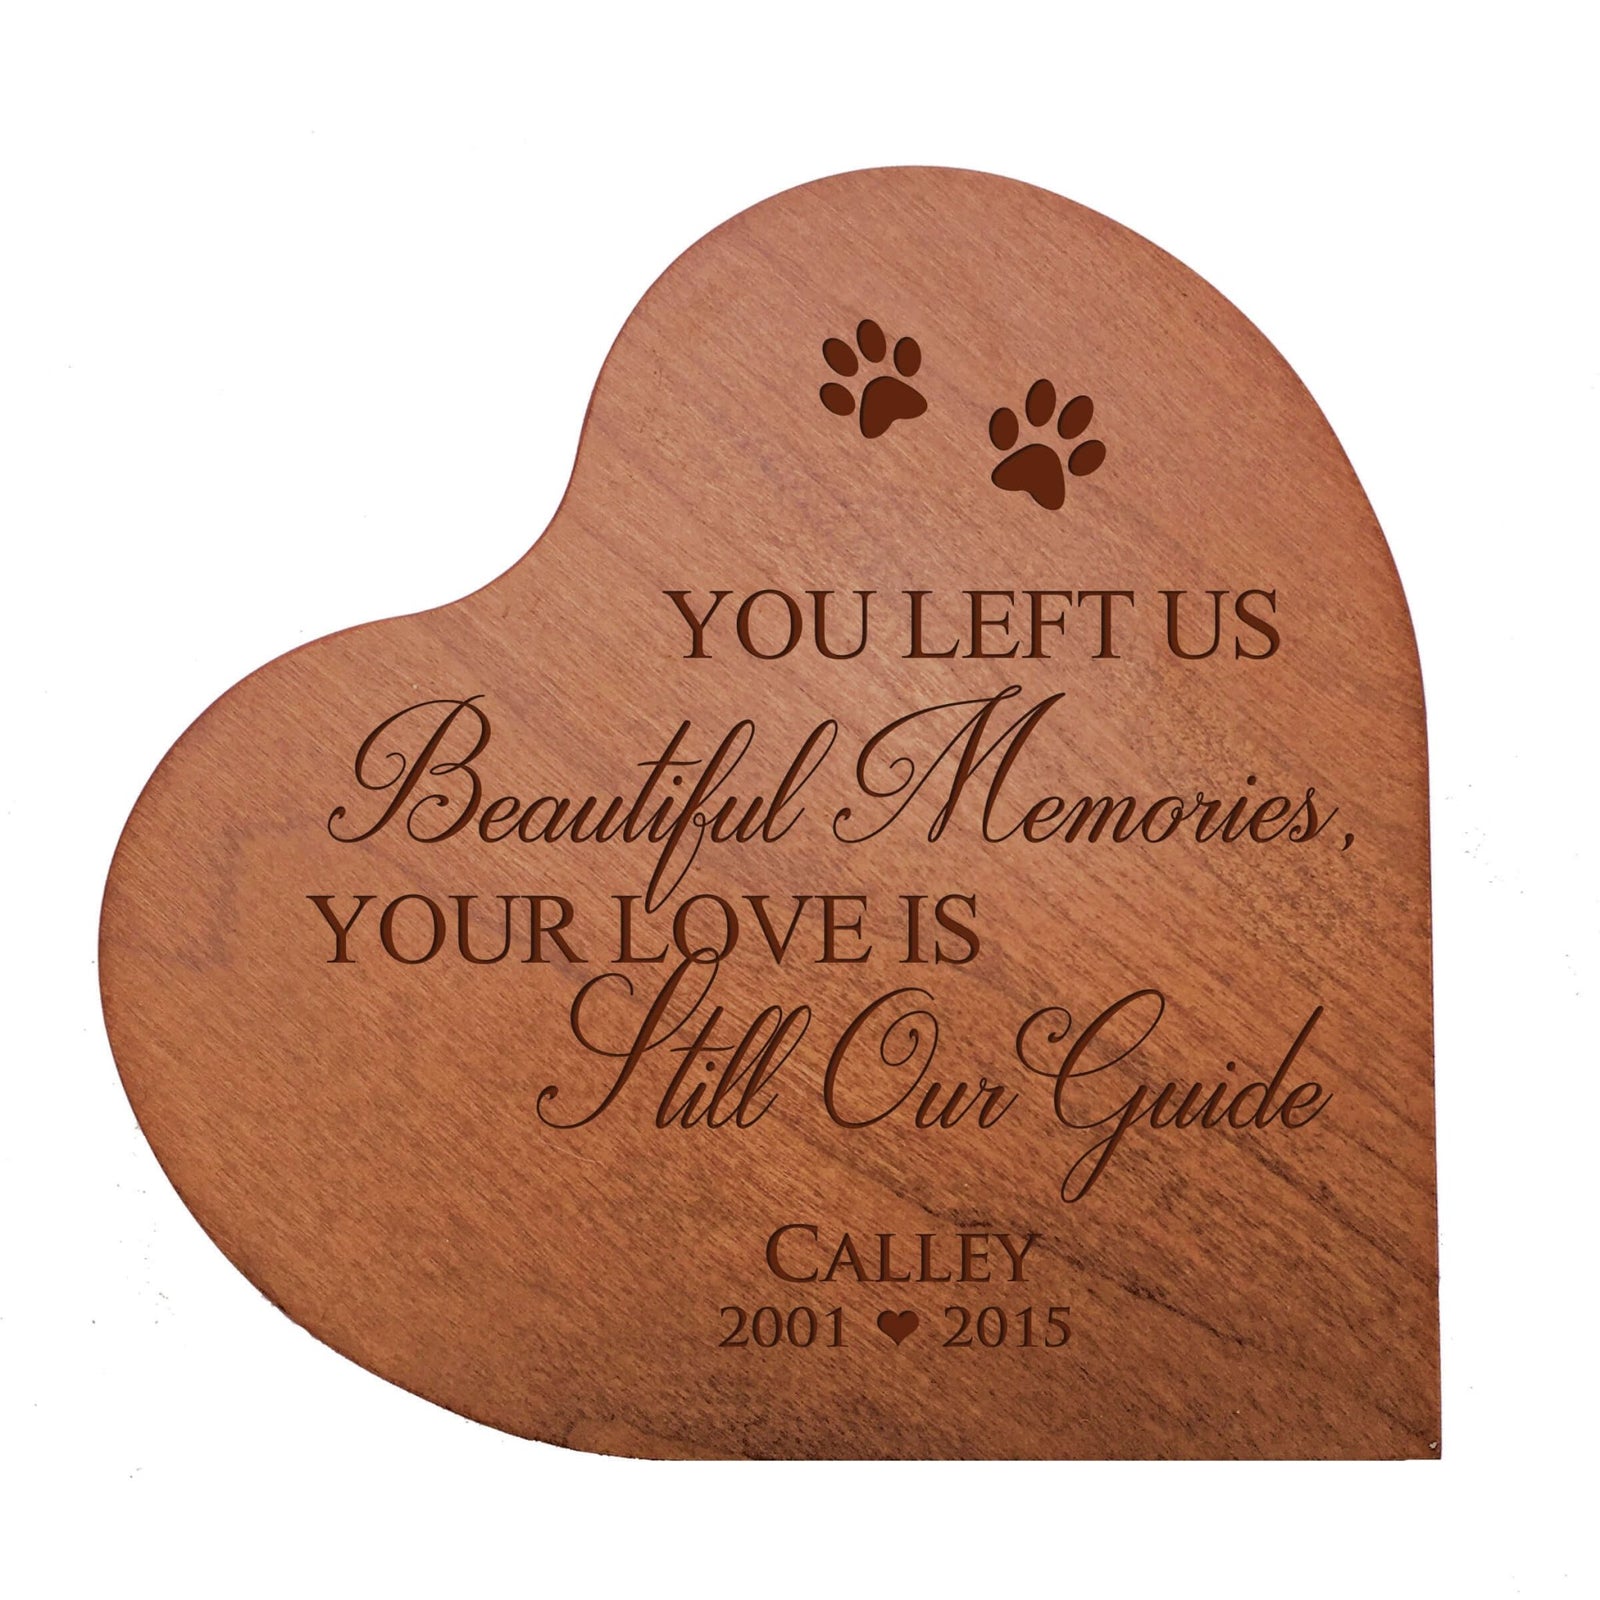 Personalized Small Heart Cremation Urn Keepsake For Pet Ashes - You Left Us Beautiful Memories - LifeSong Milestones